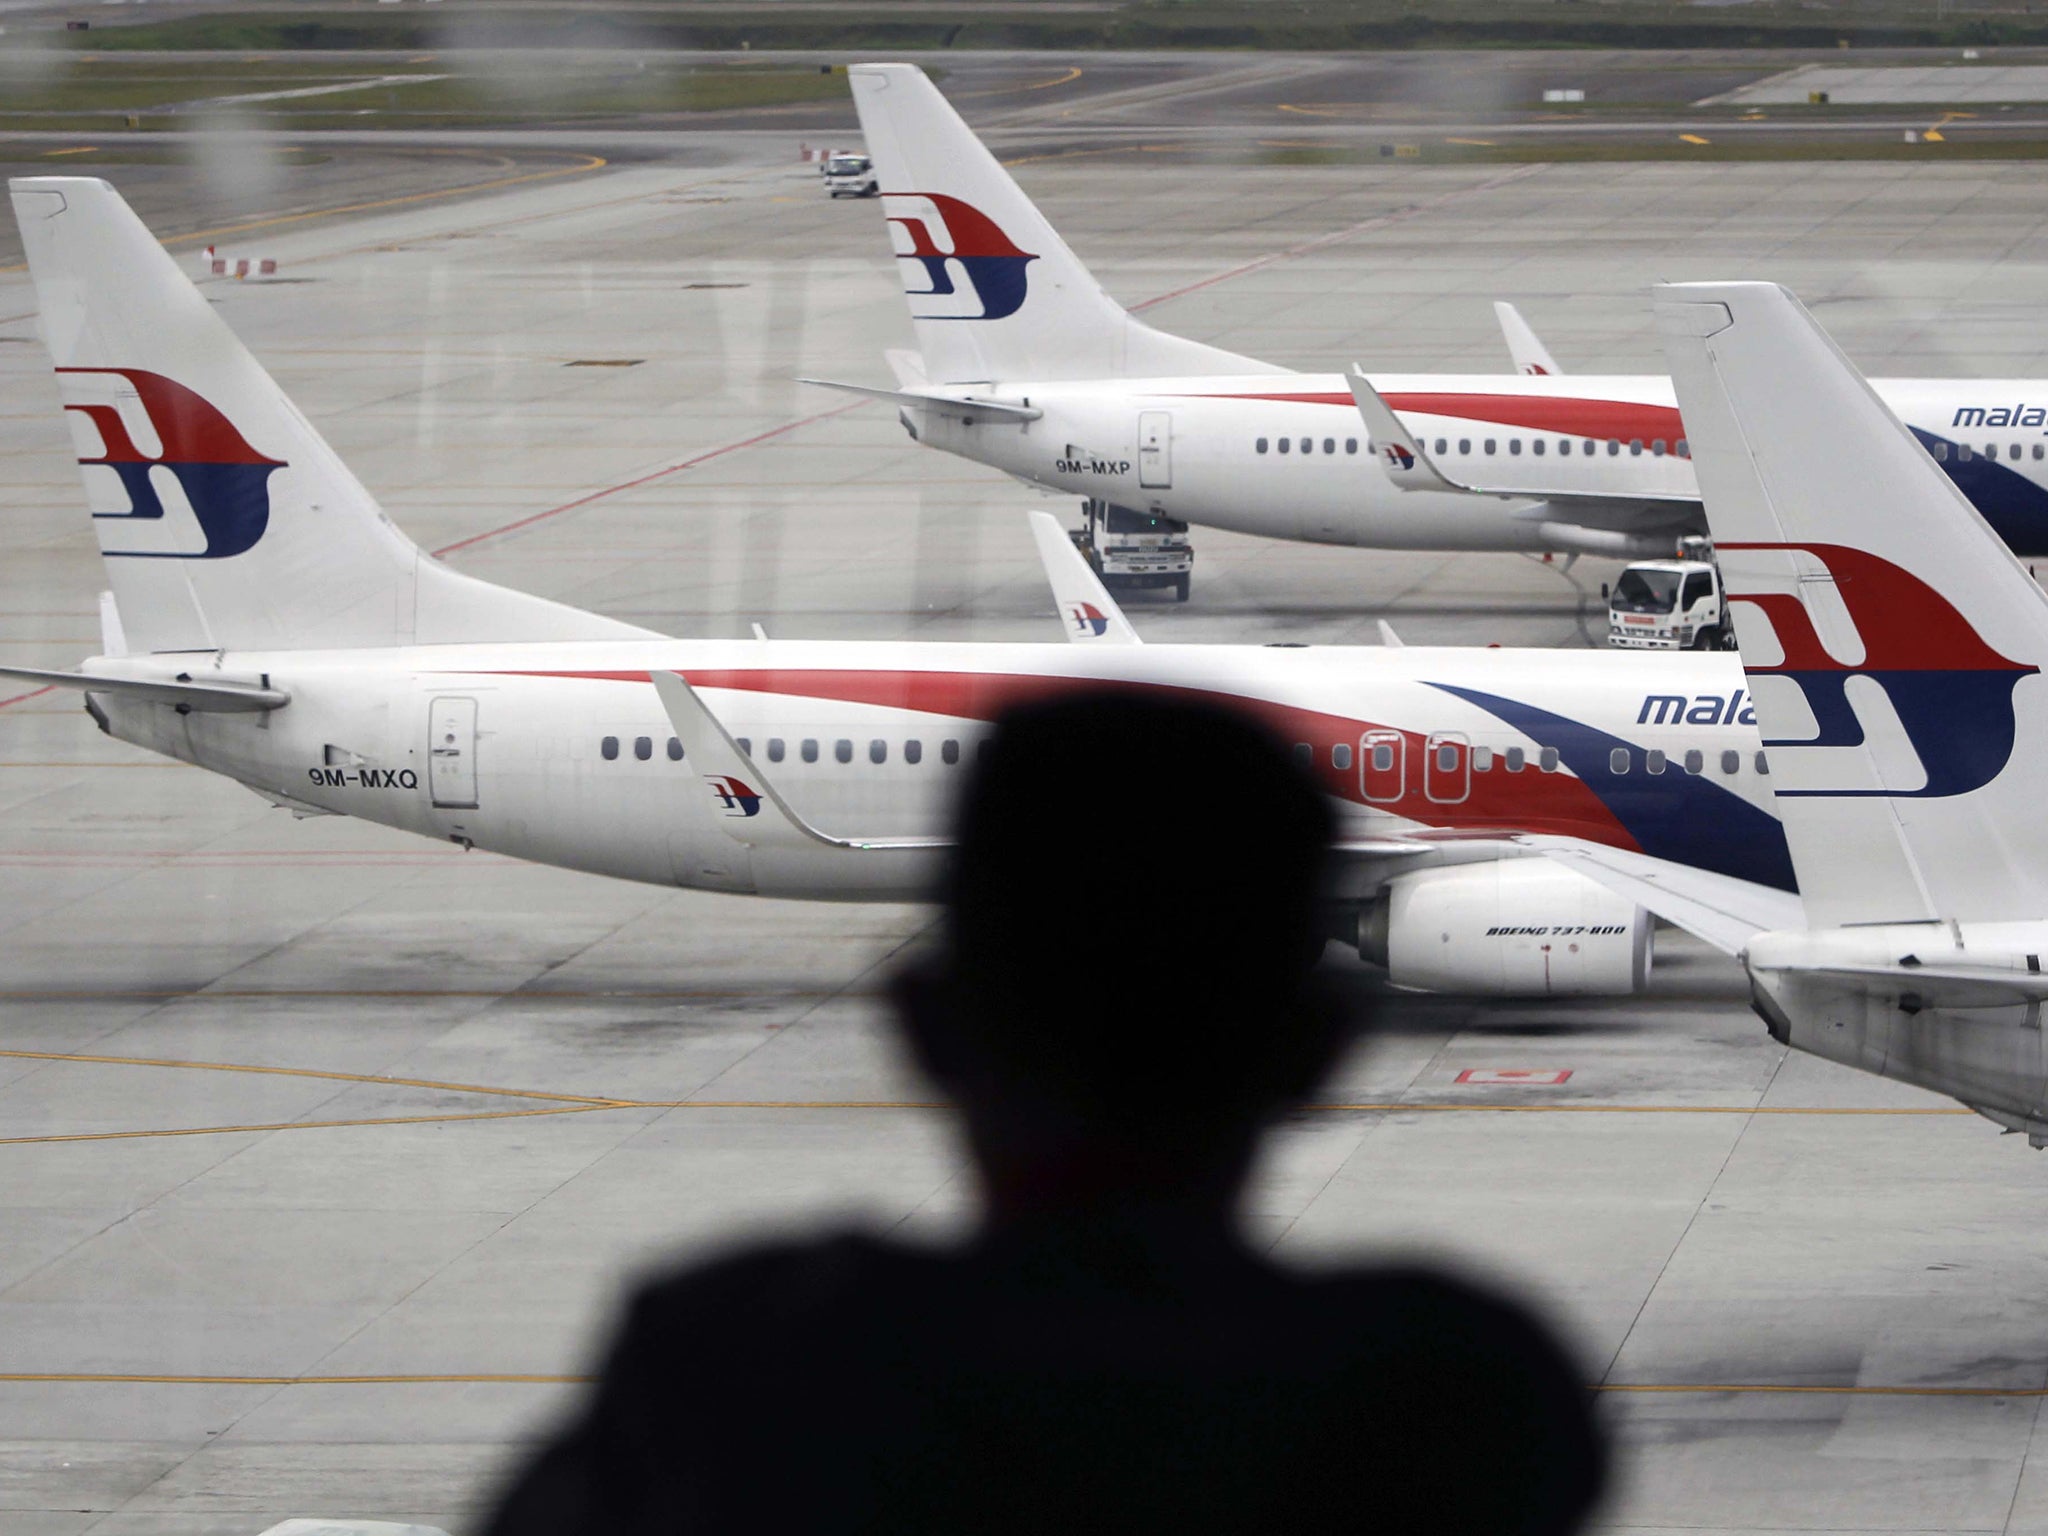 Claims from the two Malaysian Airline crashes added to £310 million of aviation claims